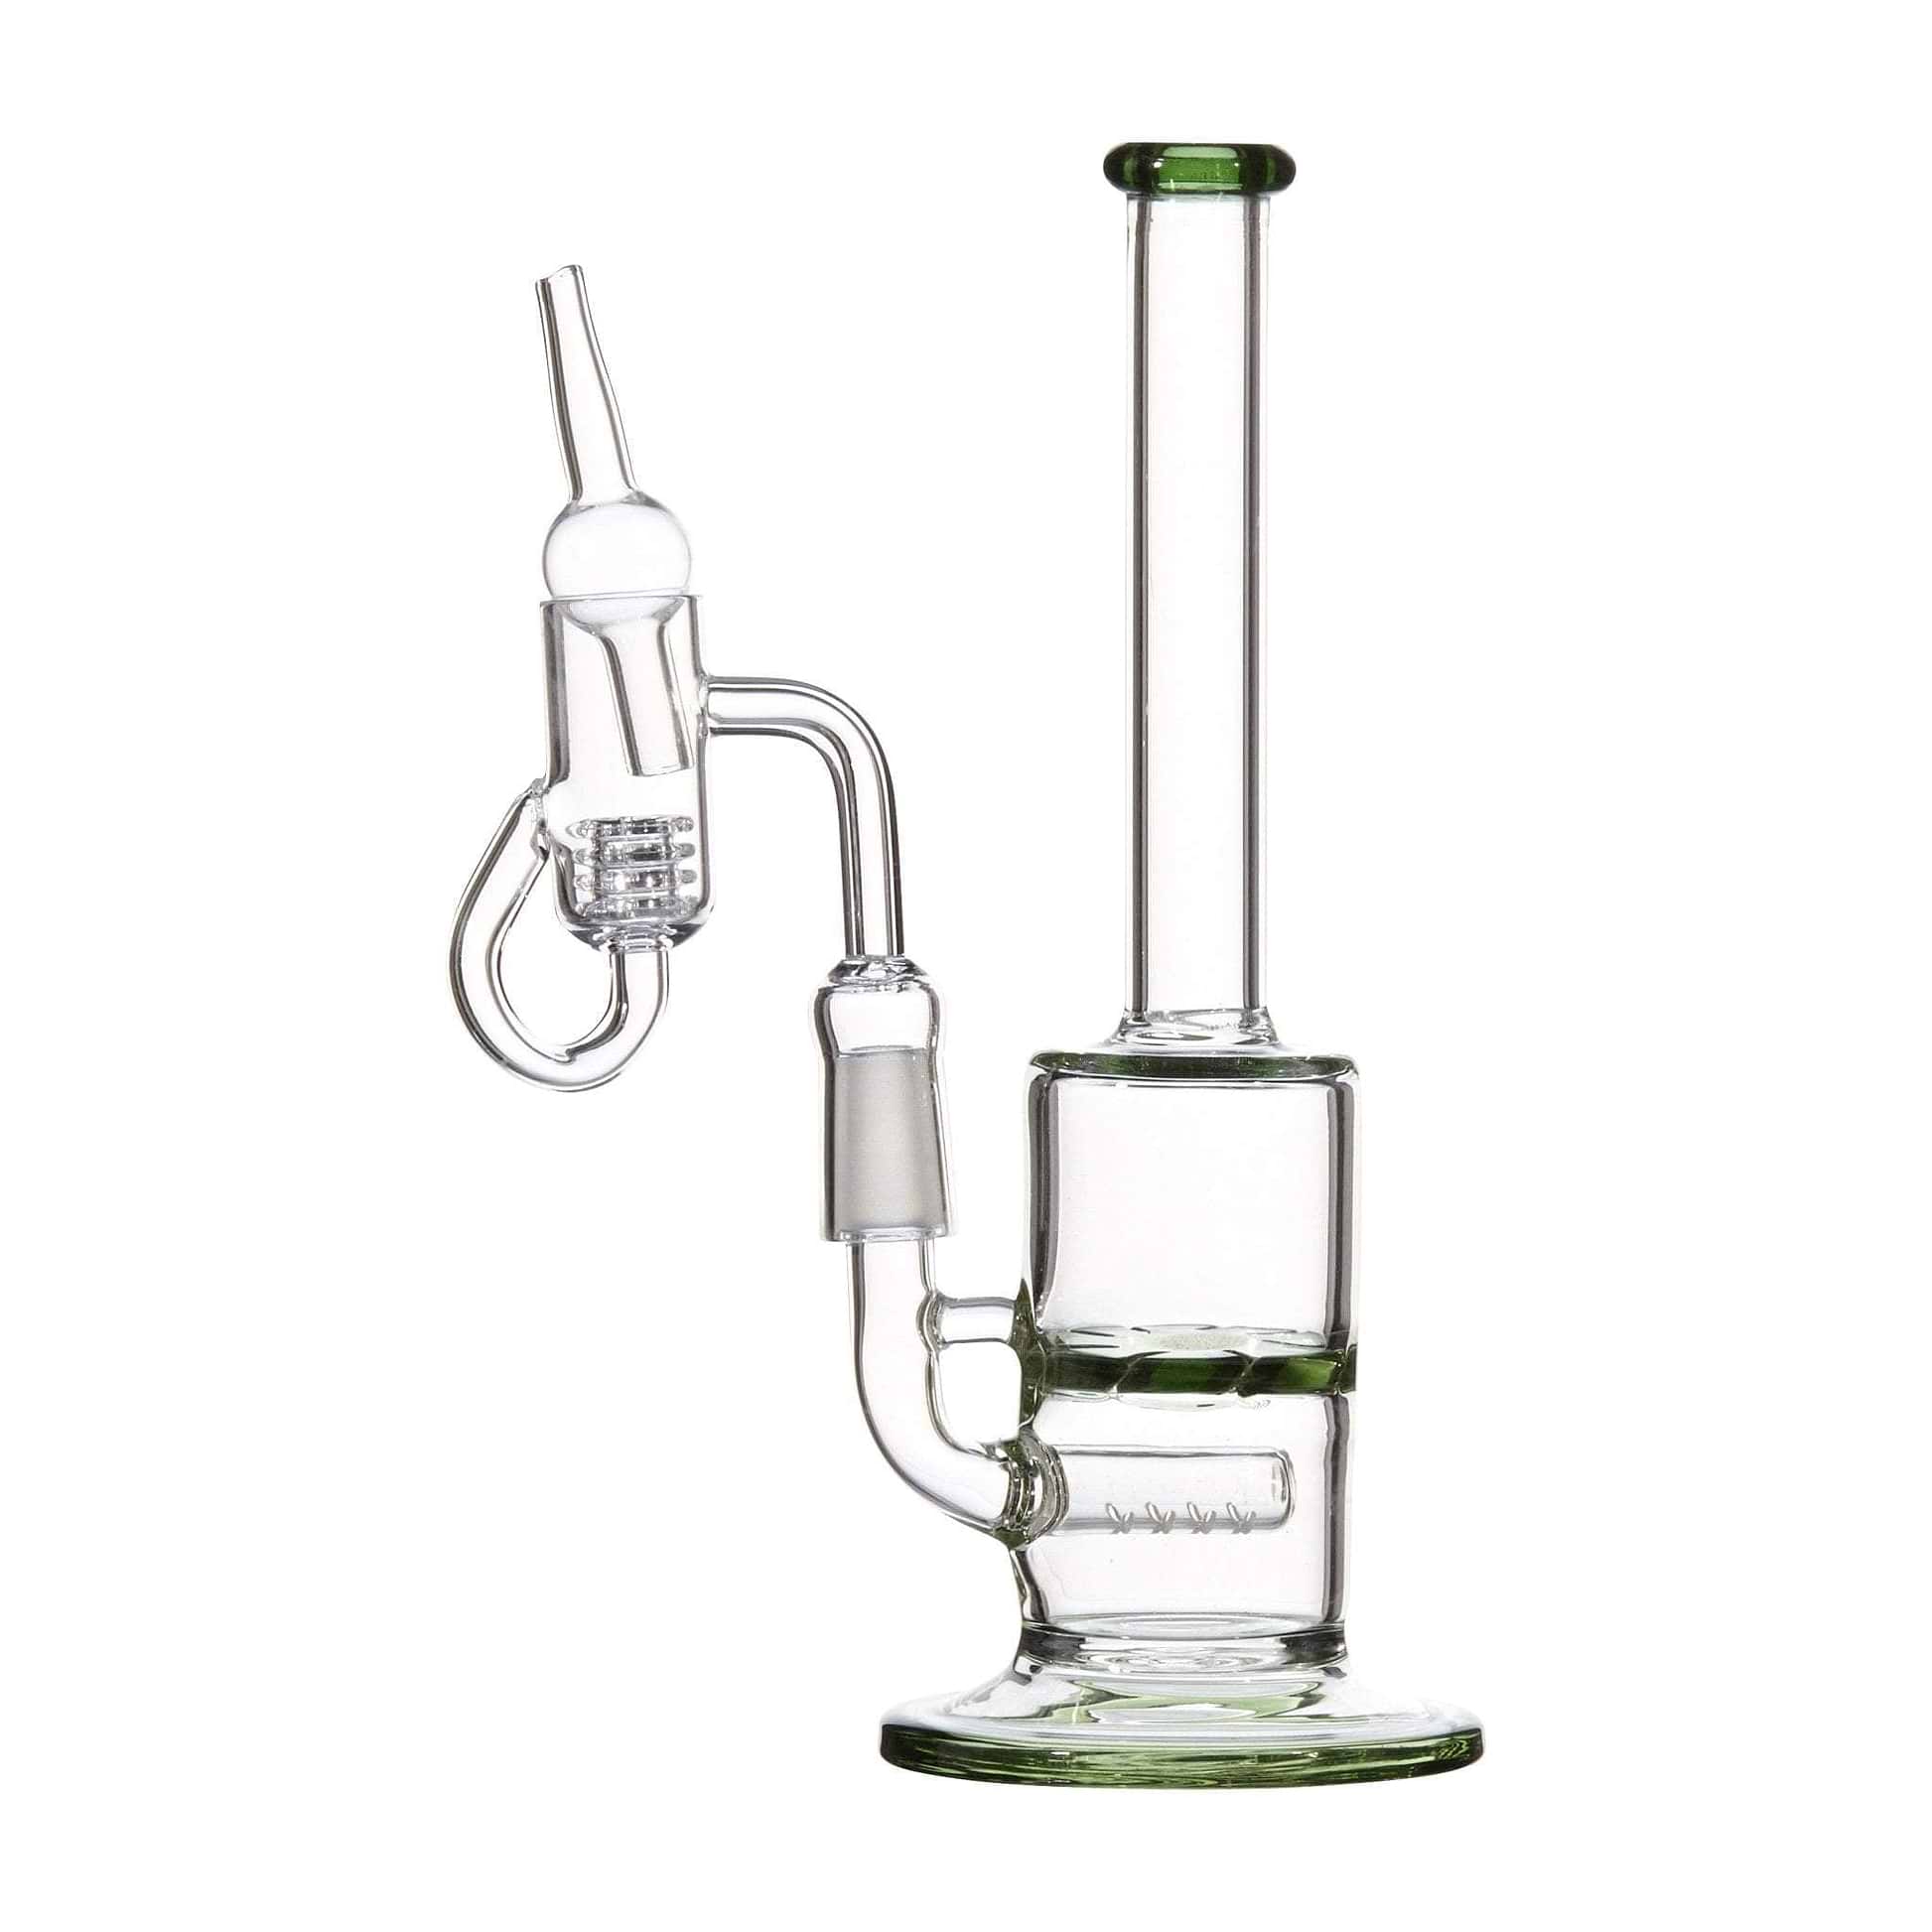 Glass little big dab bundle smoking device huge intricate design stable refreshing color accents